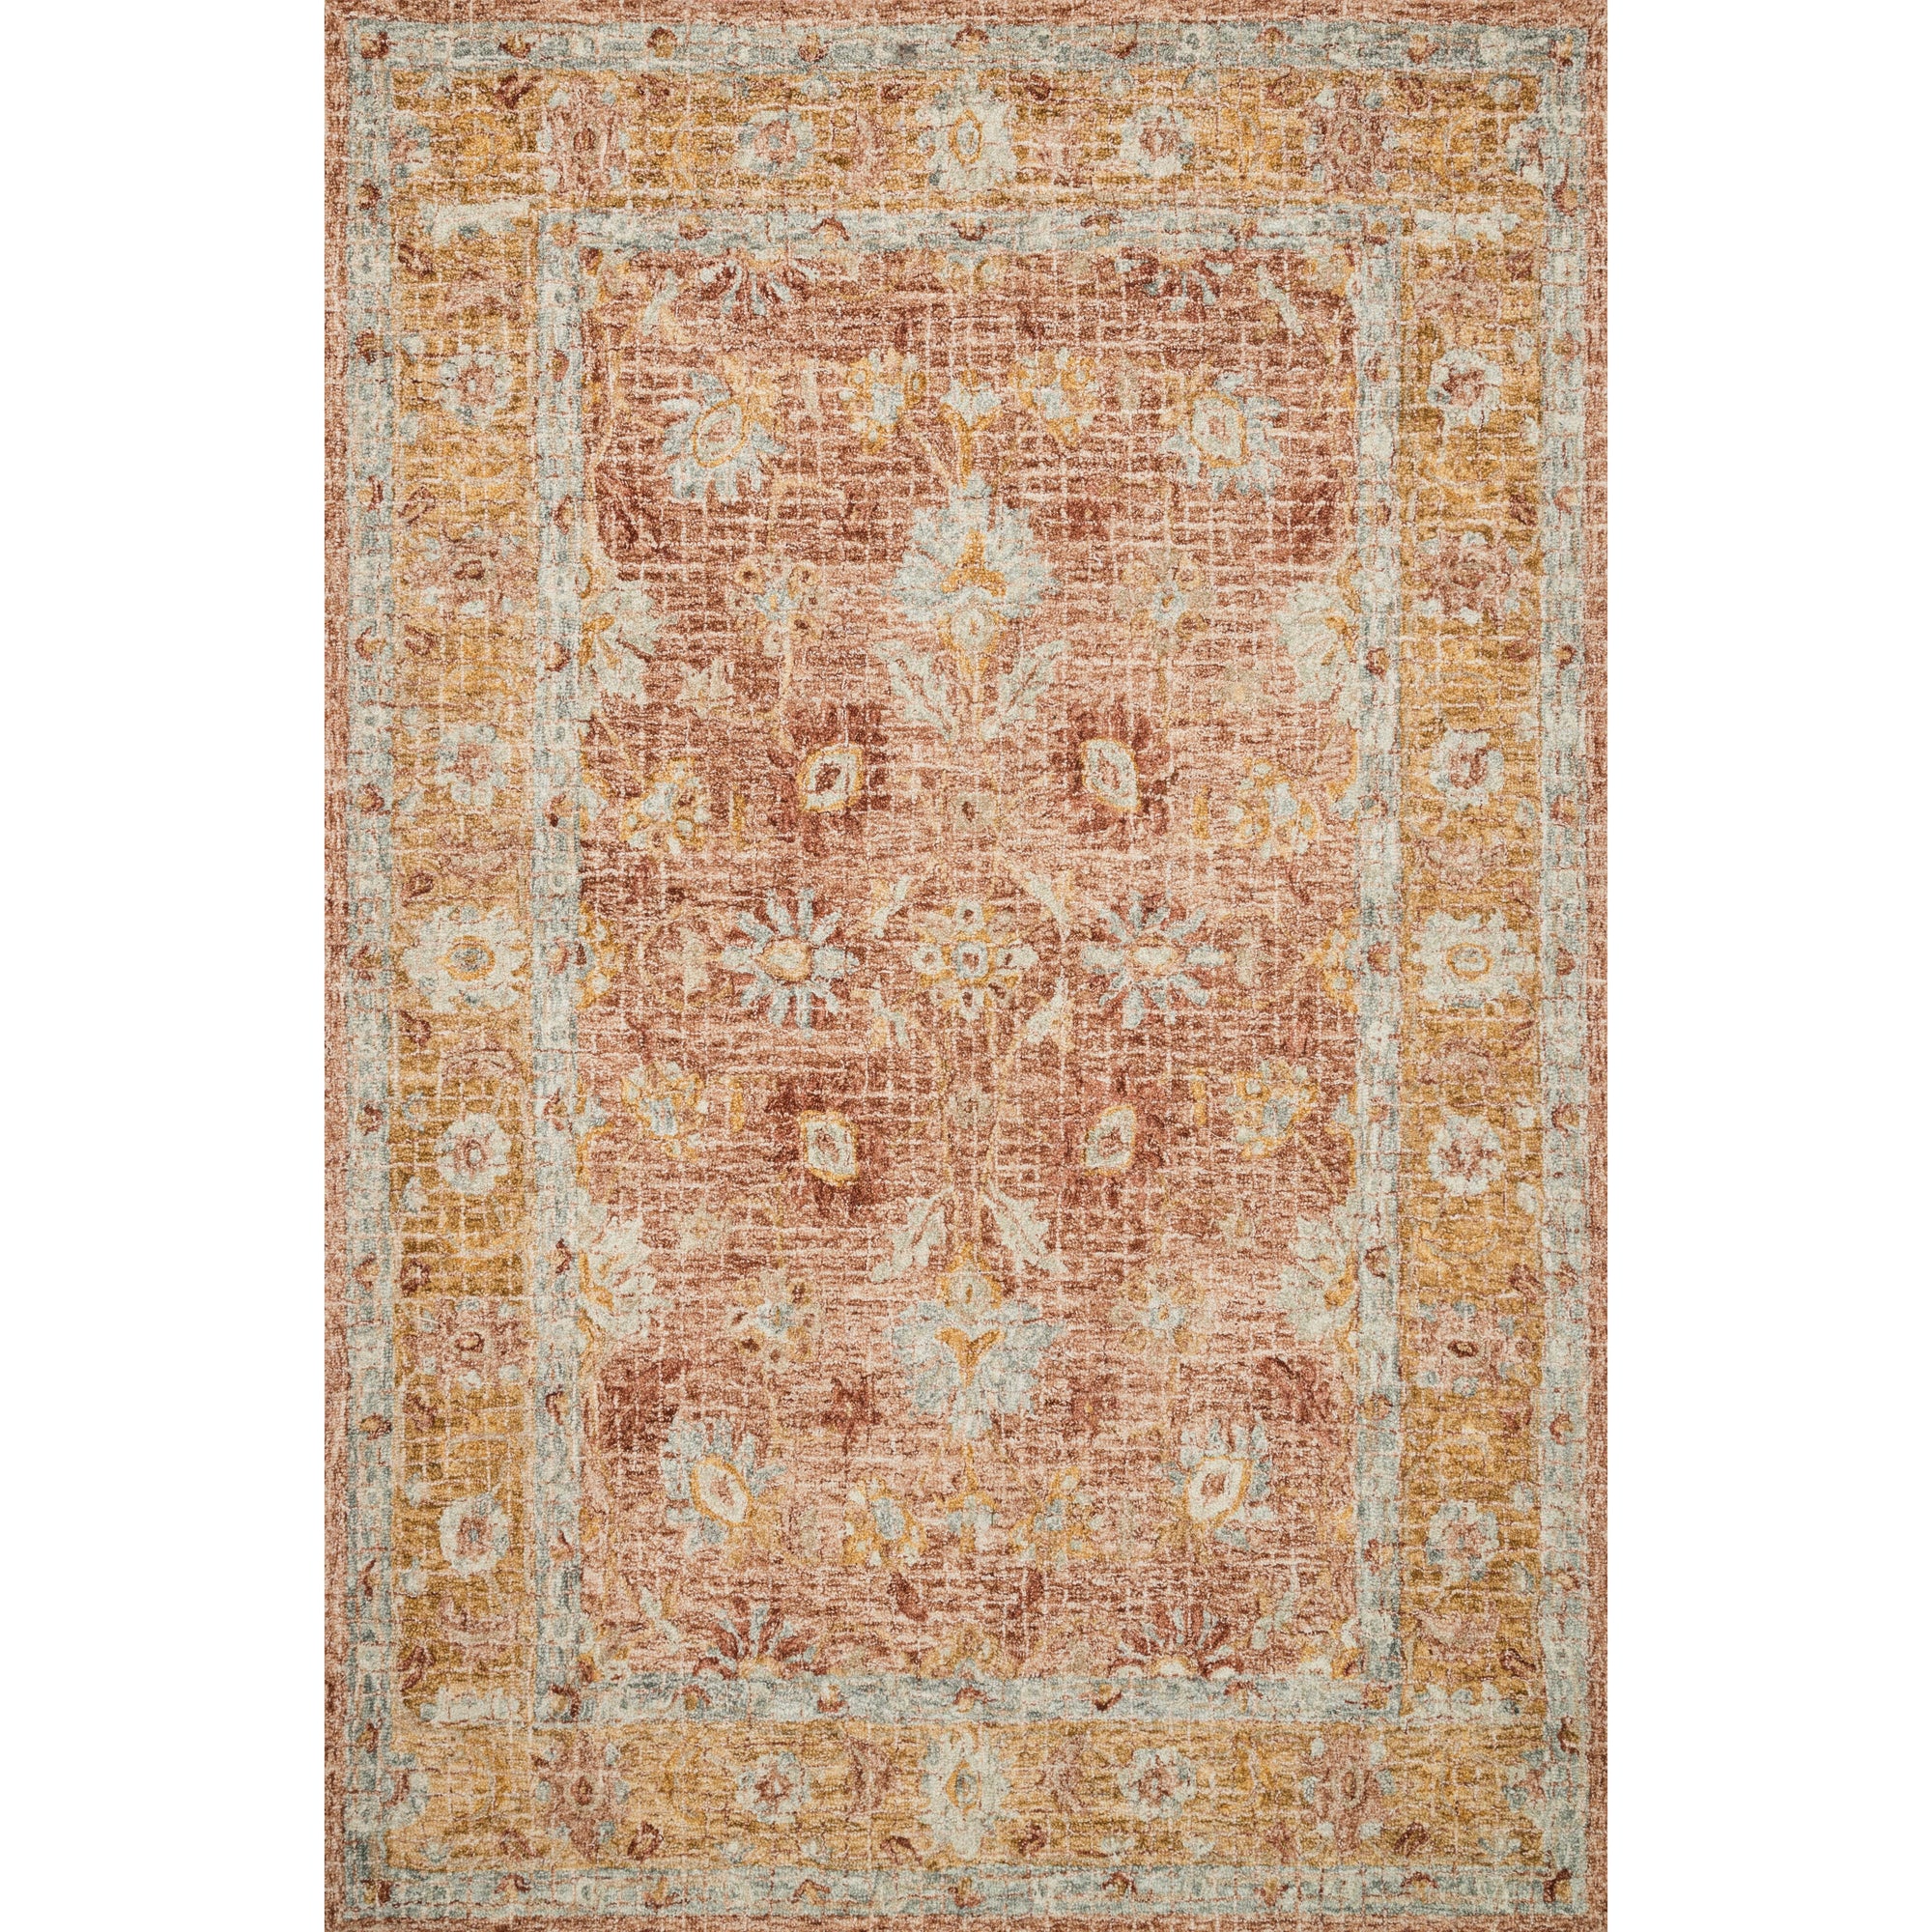 Rugs by Roo Loloi Julian Terracotta Gold Area Rug in size 18" x 18" Sample